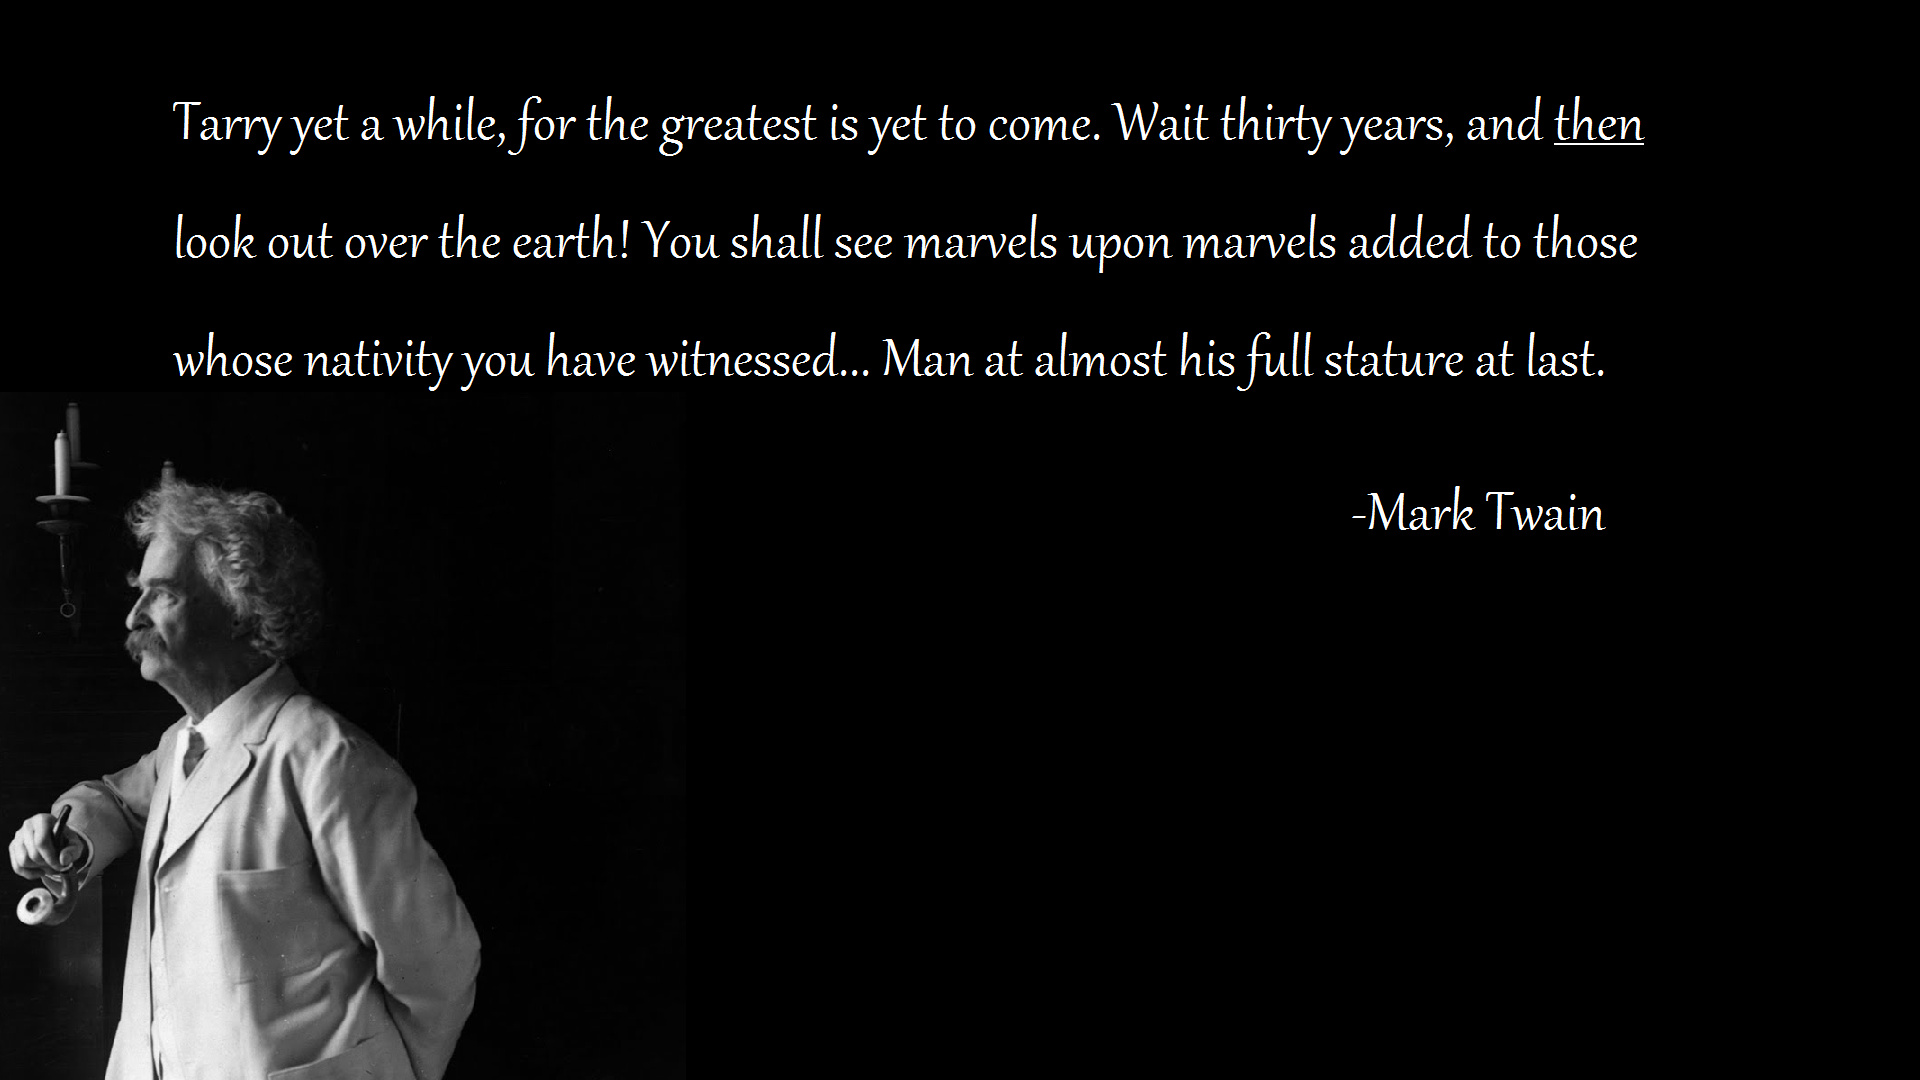 Mark Twain, Wallpaper collection, Iconic quotes, Timeless wisdom, 1920x1080 Full HD Desktop